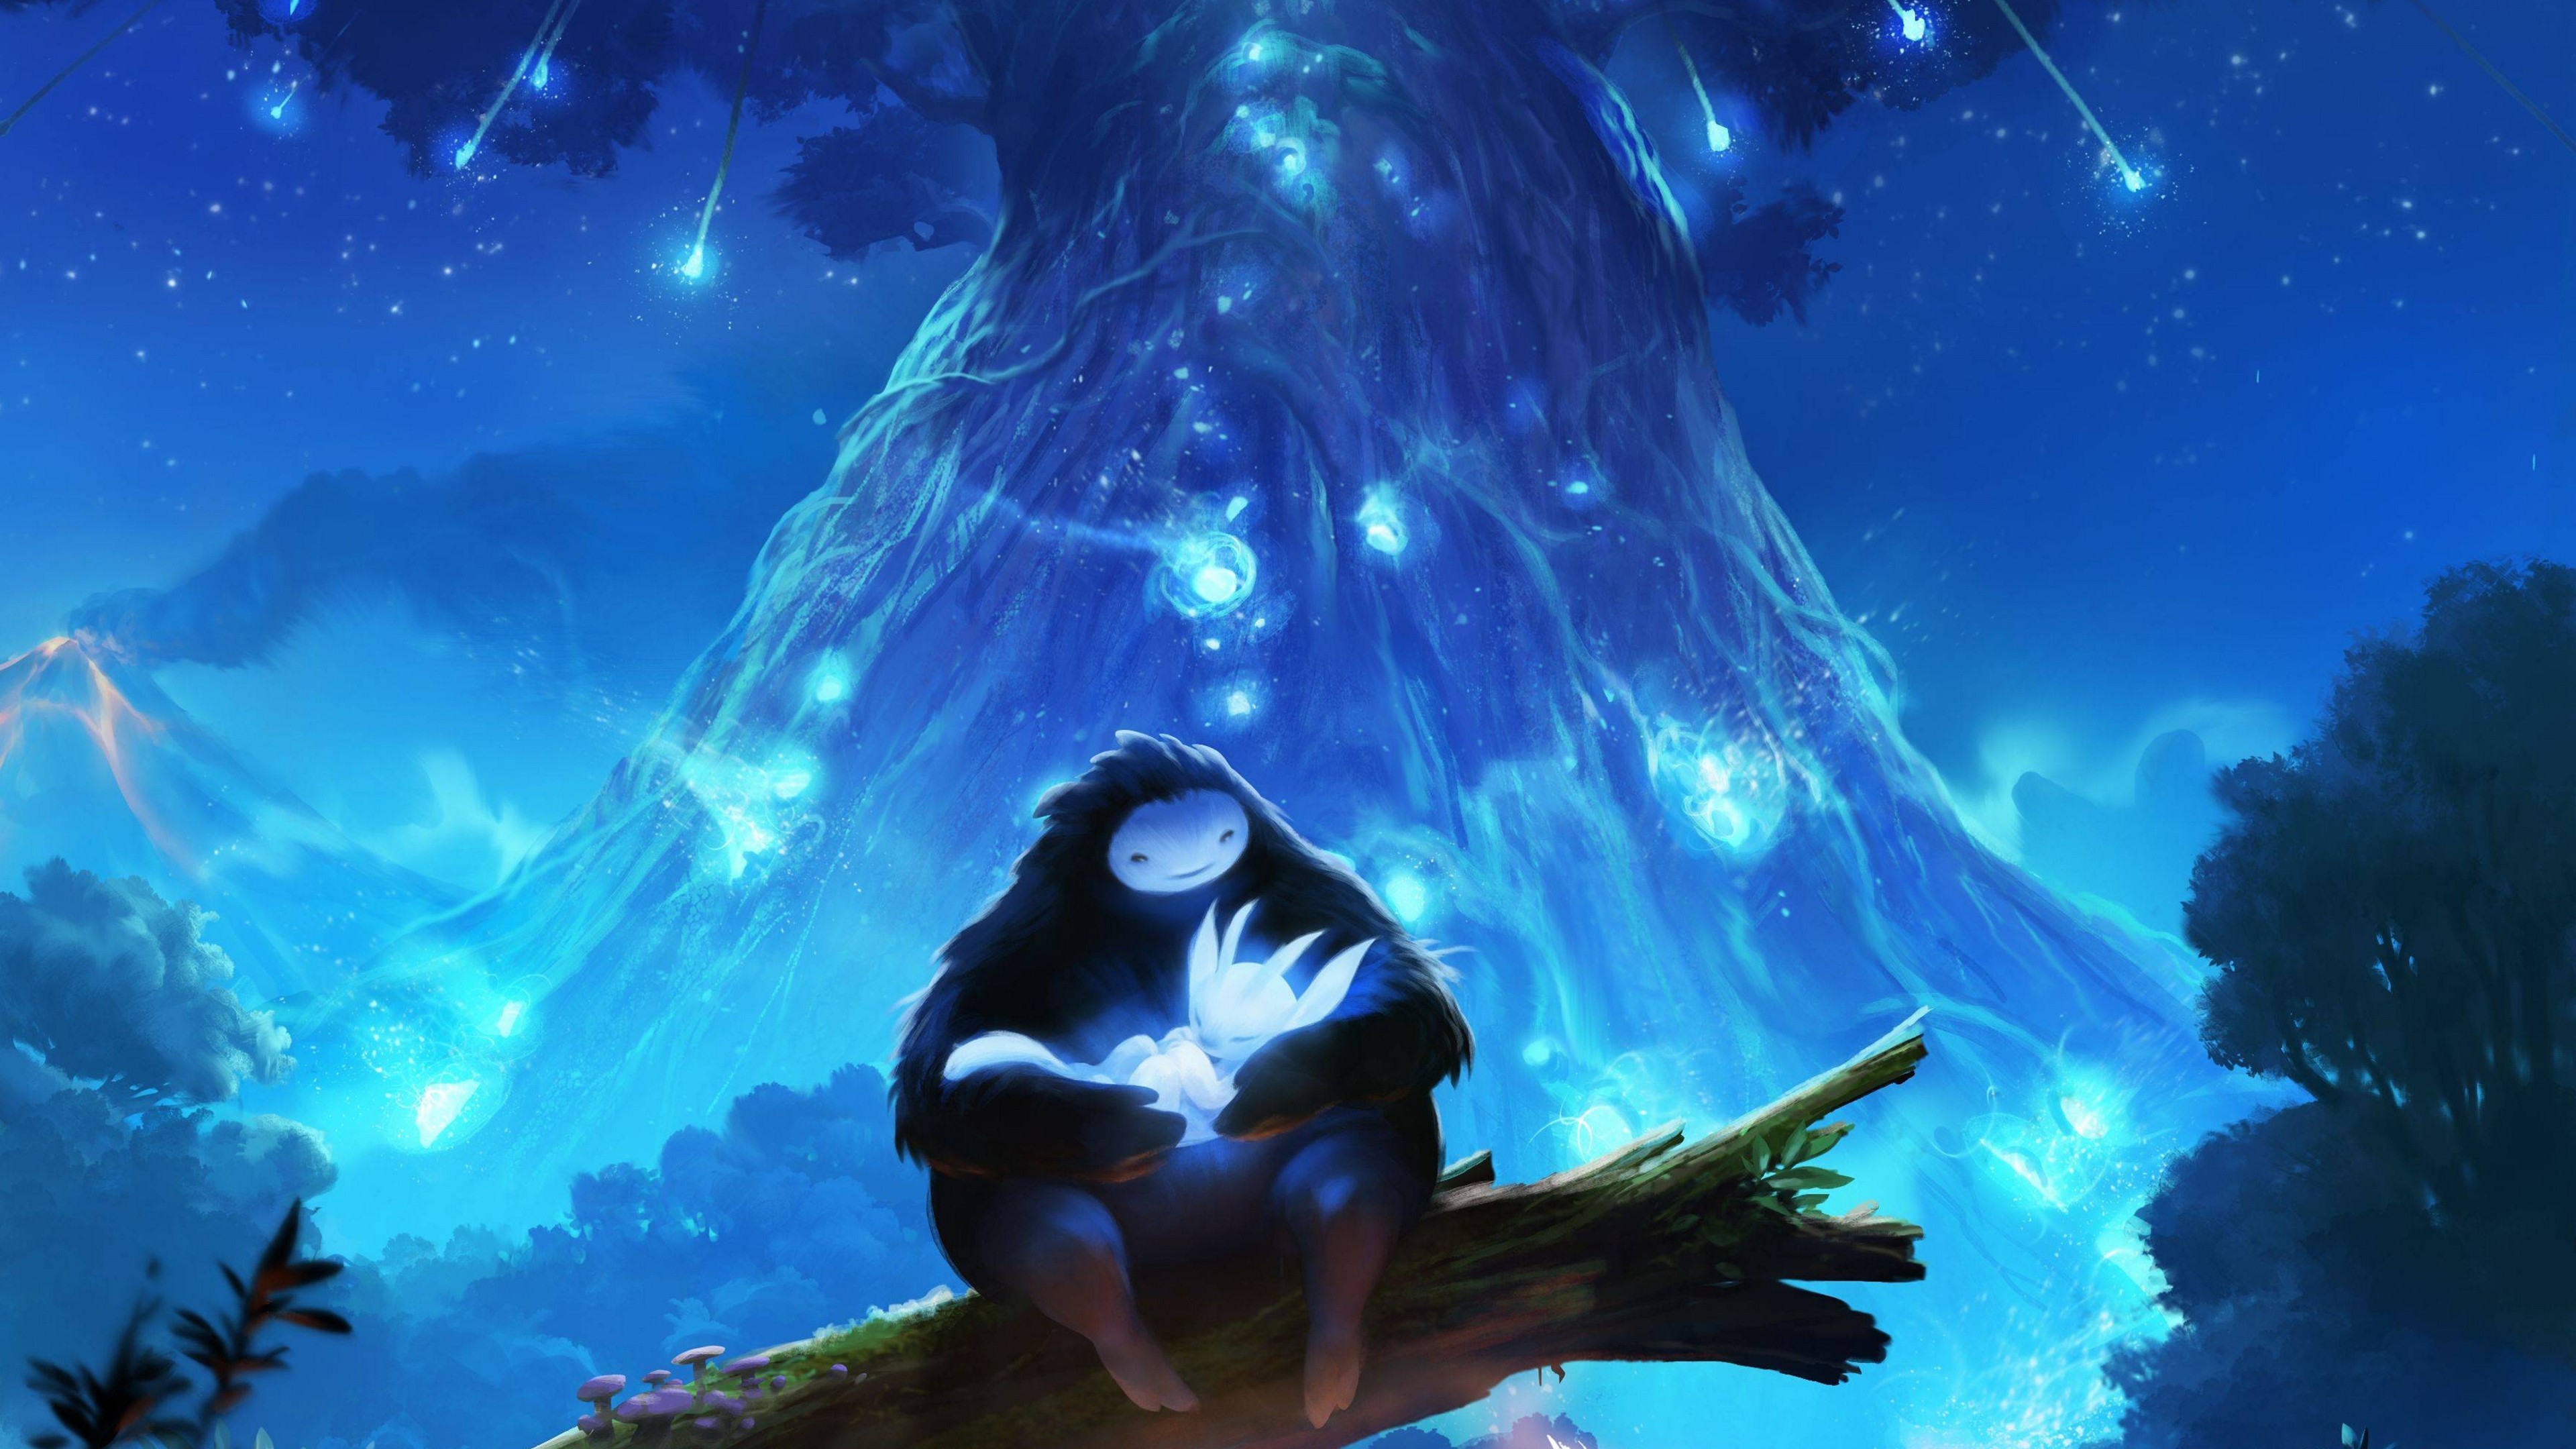 ori_and_the_blind_forest_4k-3840x2160.jpg